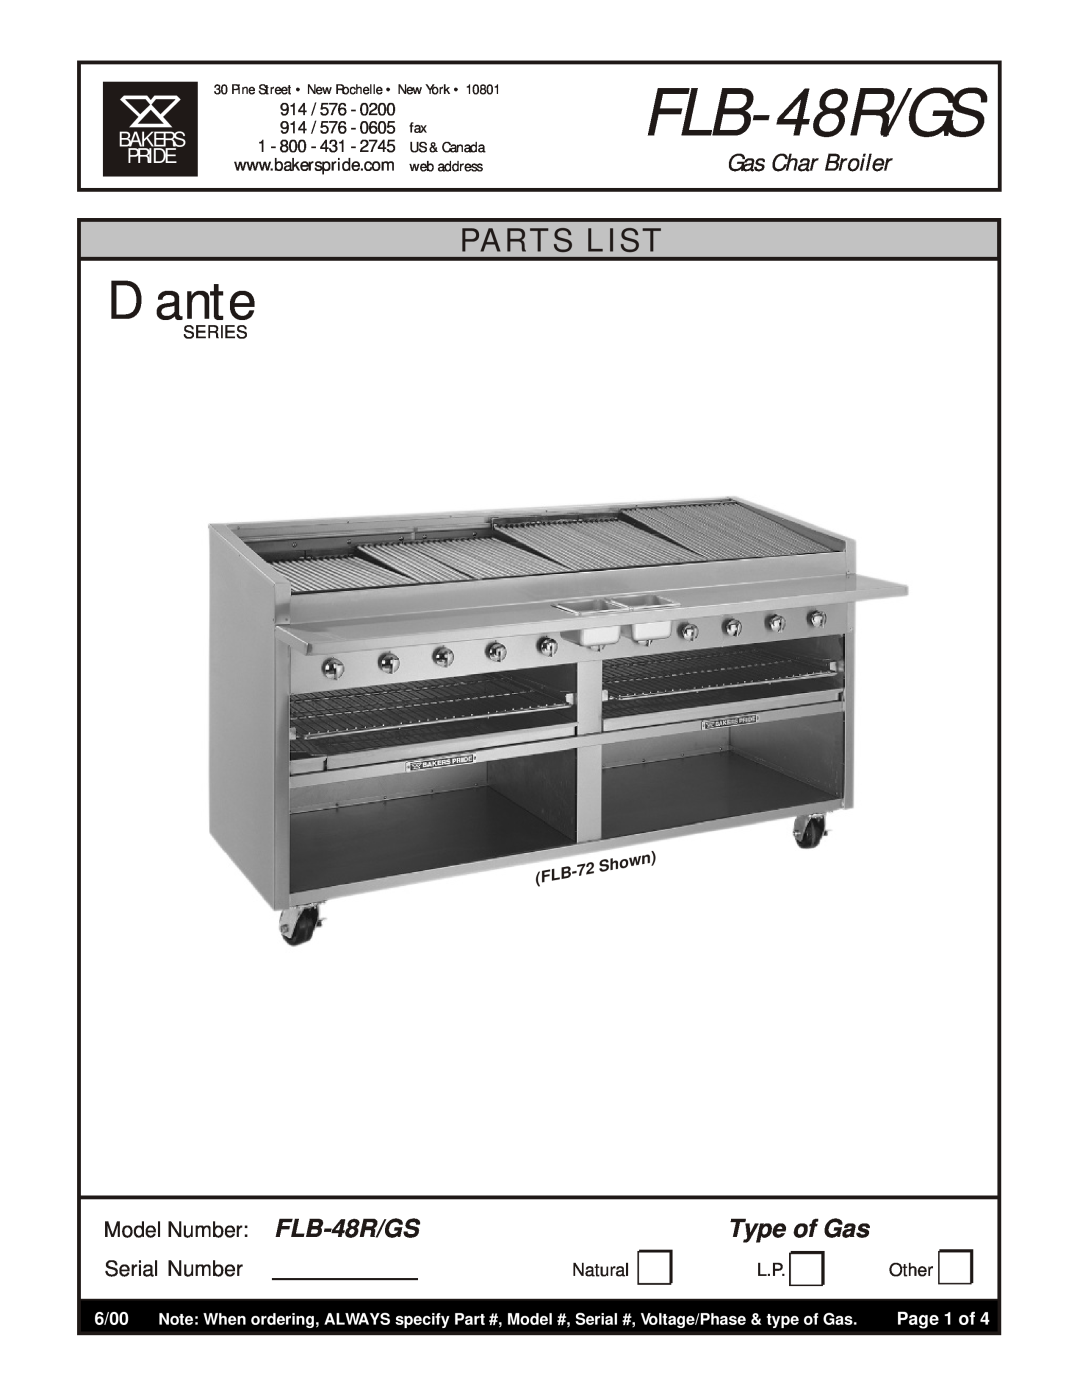 Bakers Pride Oven FLB-48R/GS manual Gas Char Broiler, Type of Gas, 0200, 0605, 2745, Dante, Parts List, Series, Natural 